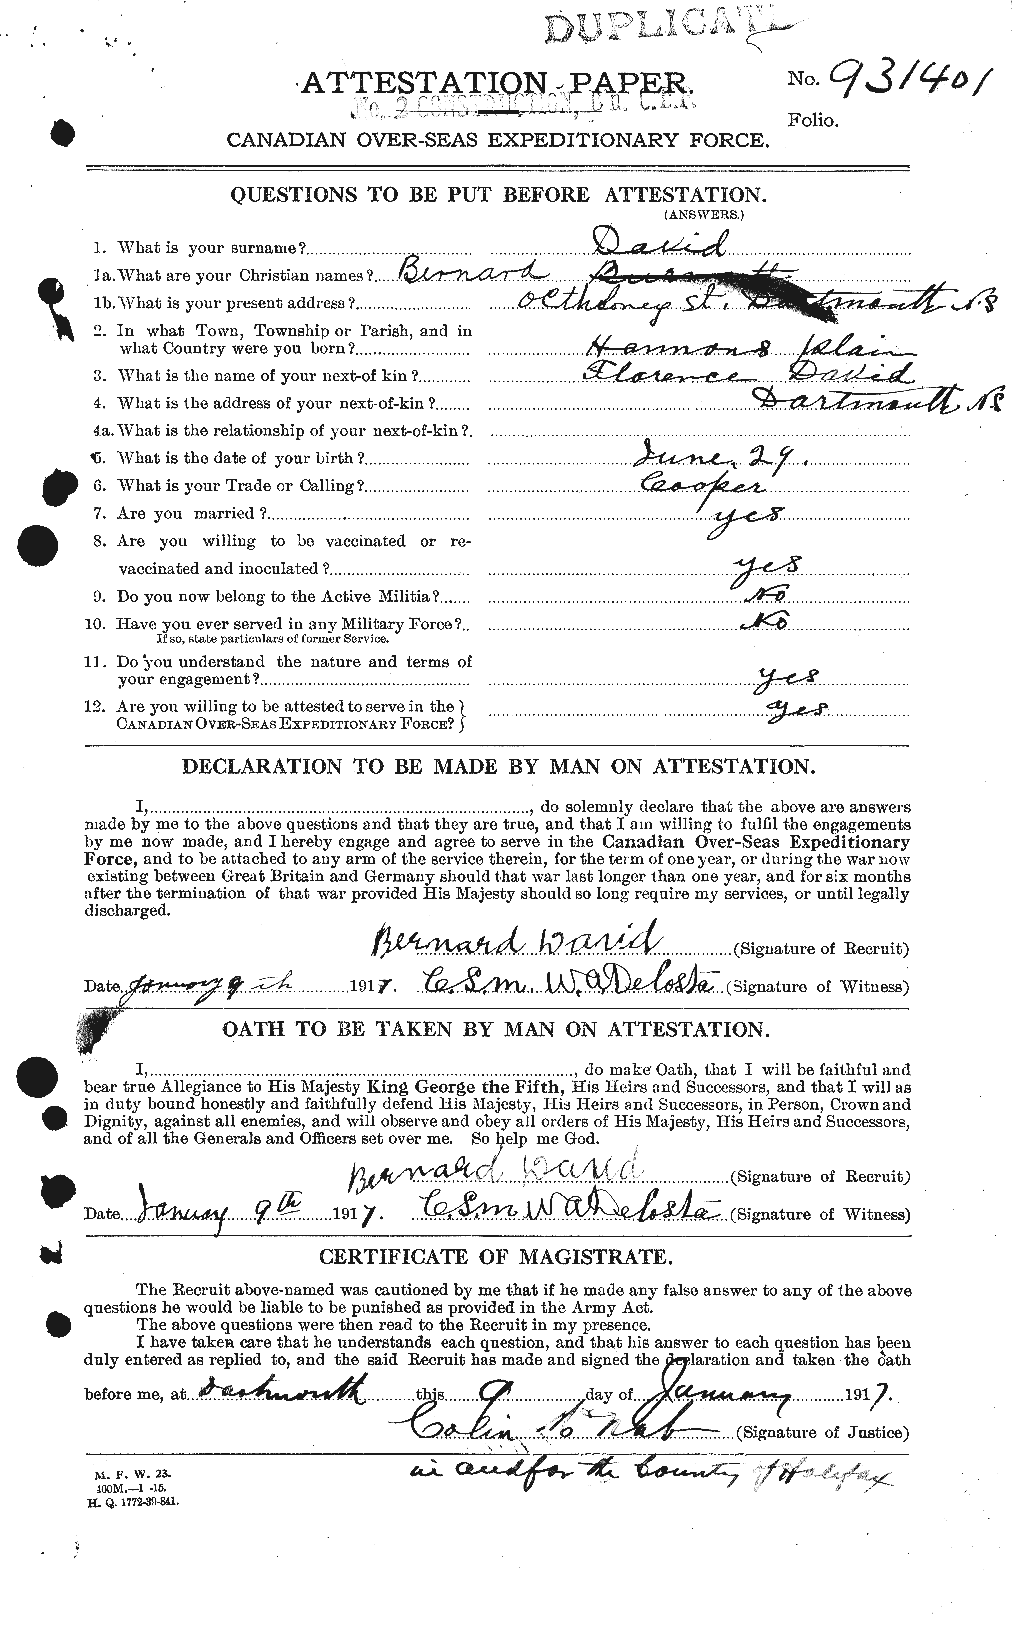 Personnel Records of the First World War - CEF 280592a